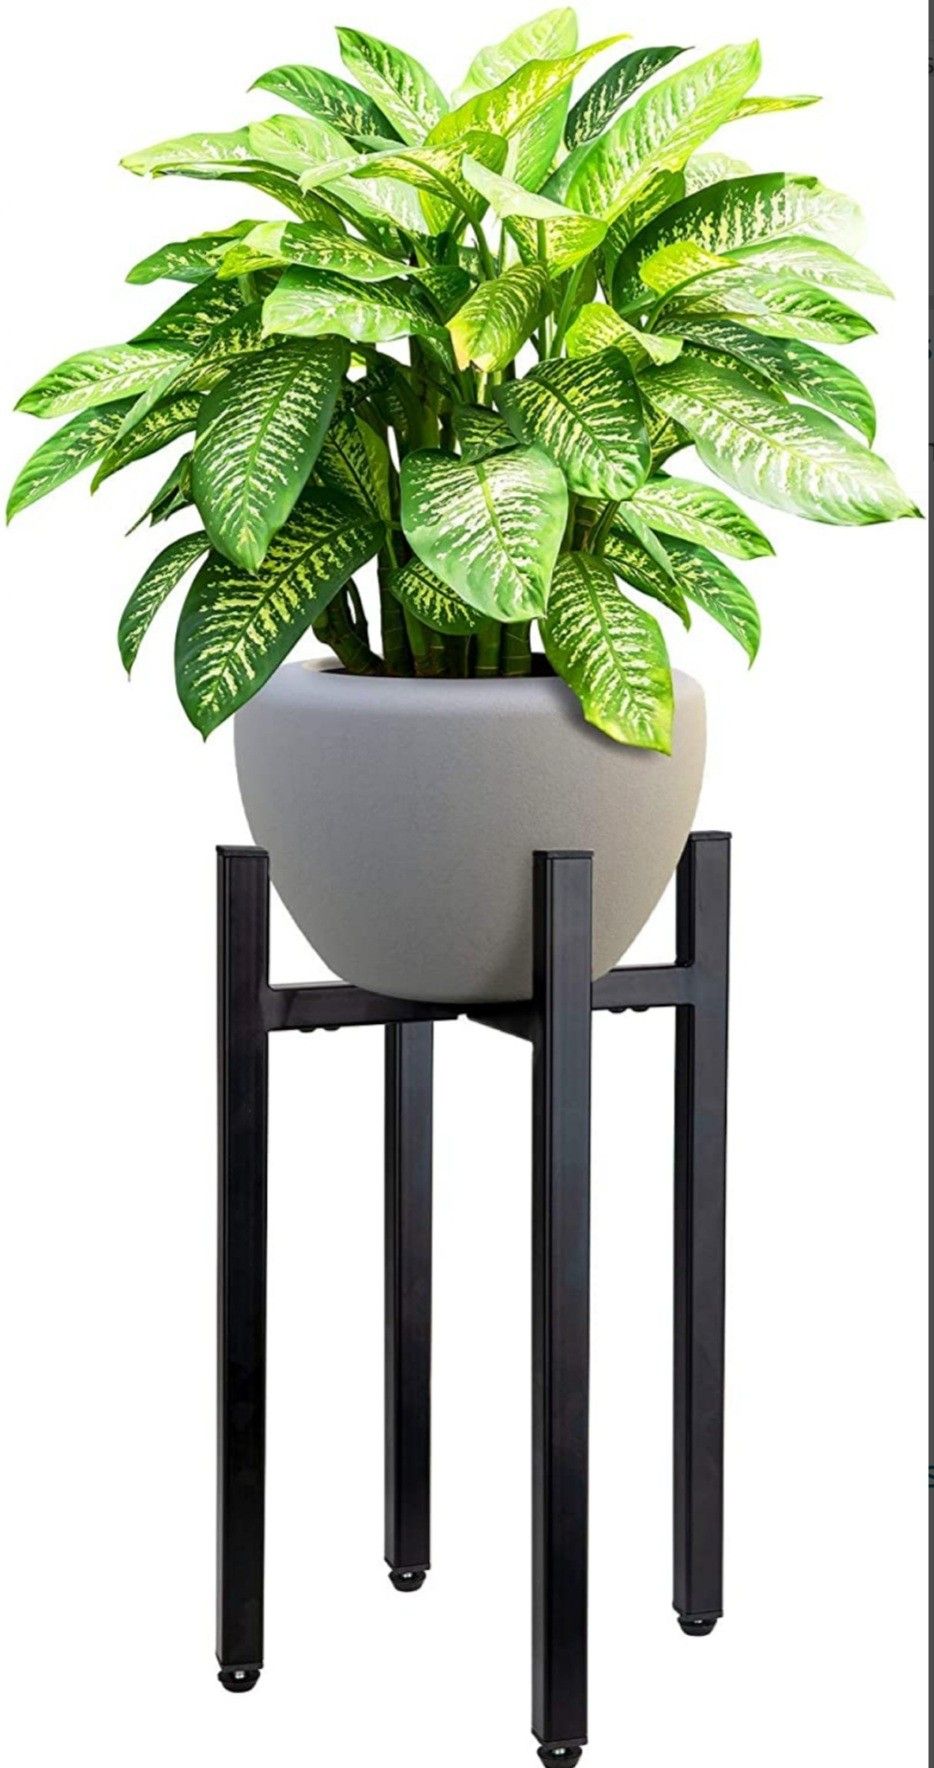 Mid-century plant stand (plant and pot not included)